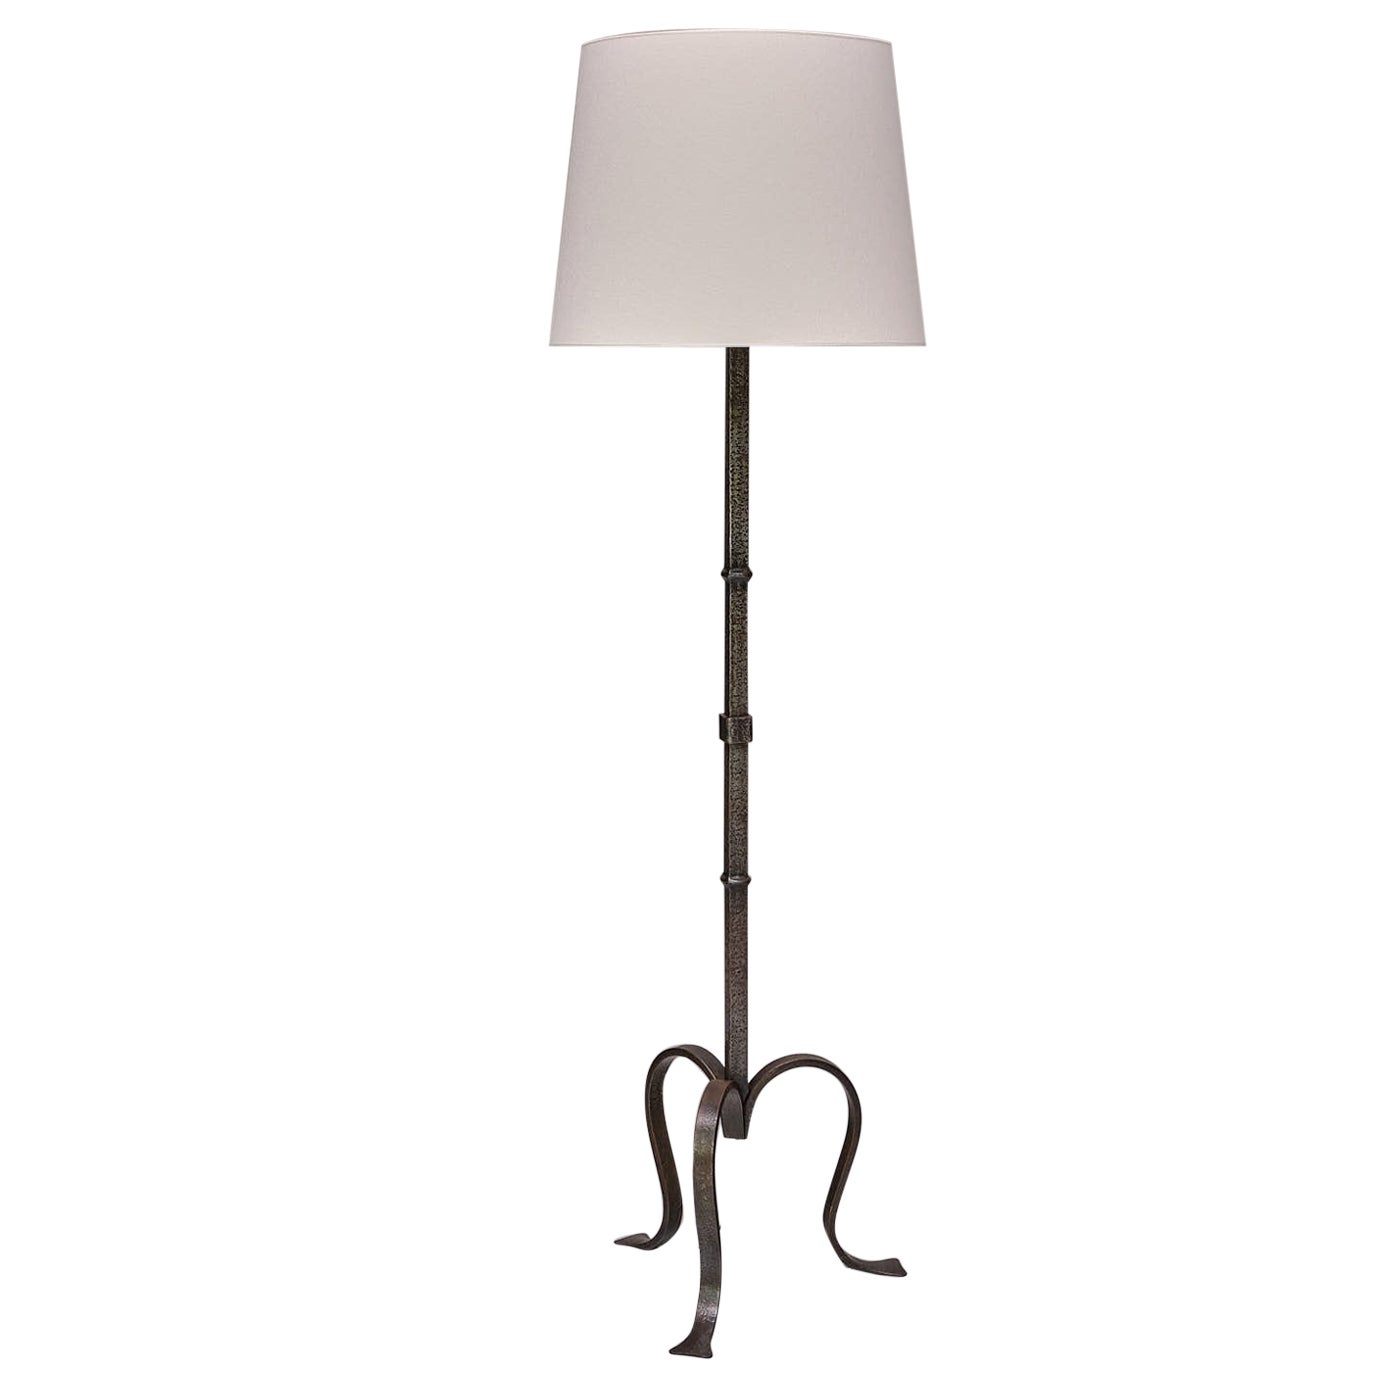 Sculptural French Modern Three Legged Floor Lamp in Wrought Iron, 1950s For Sale